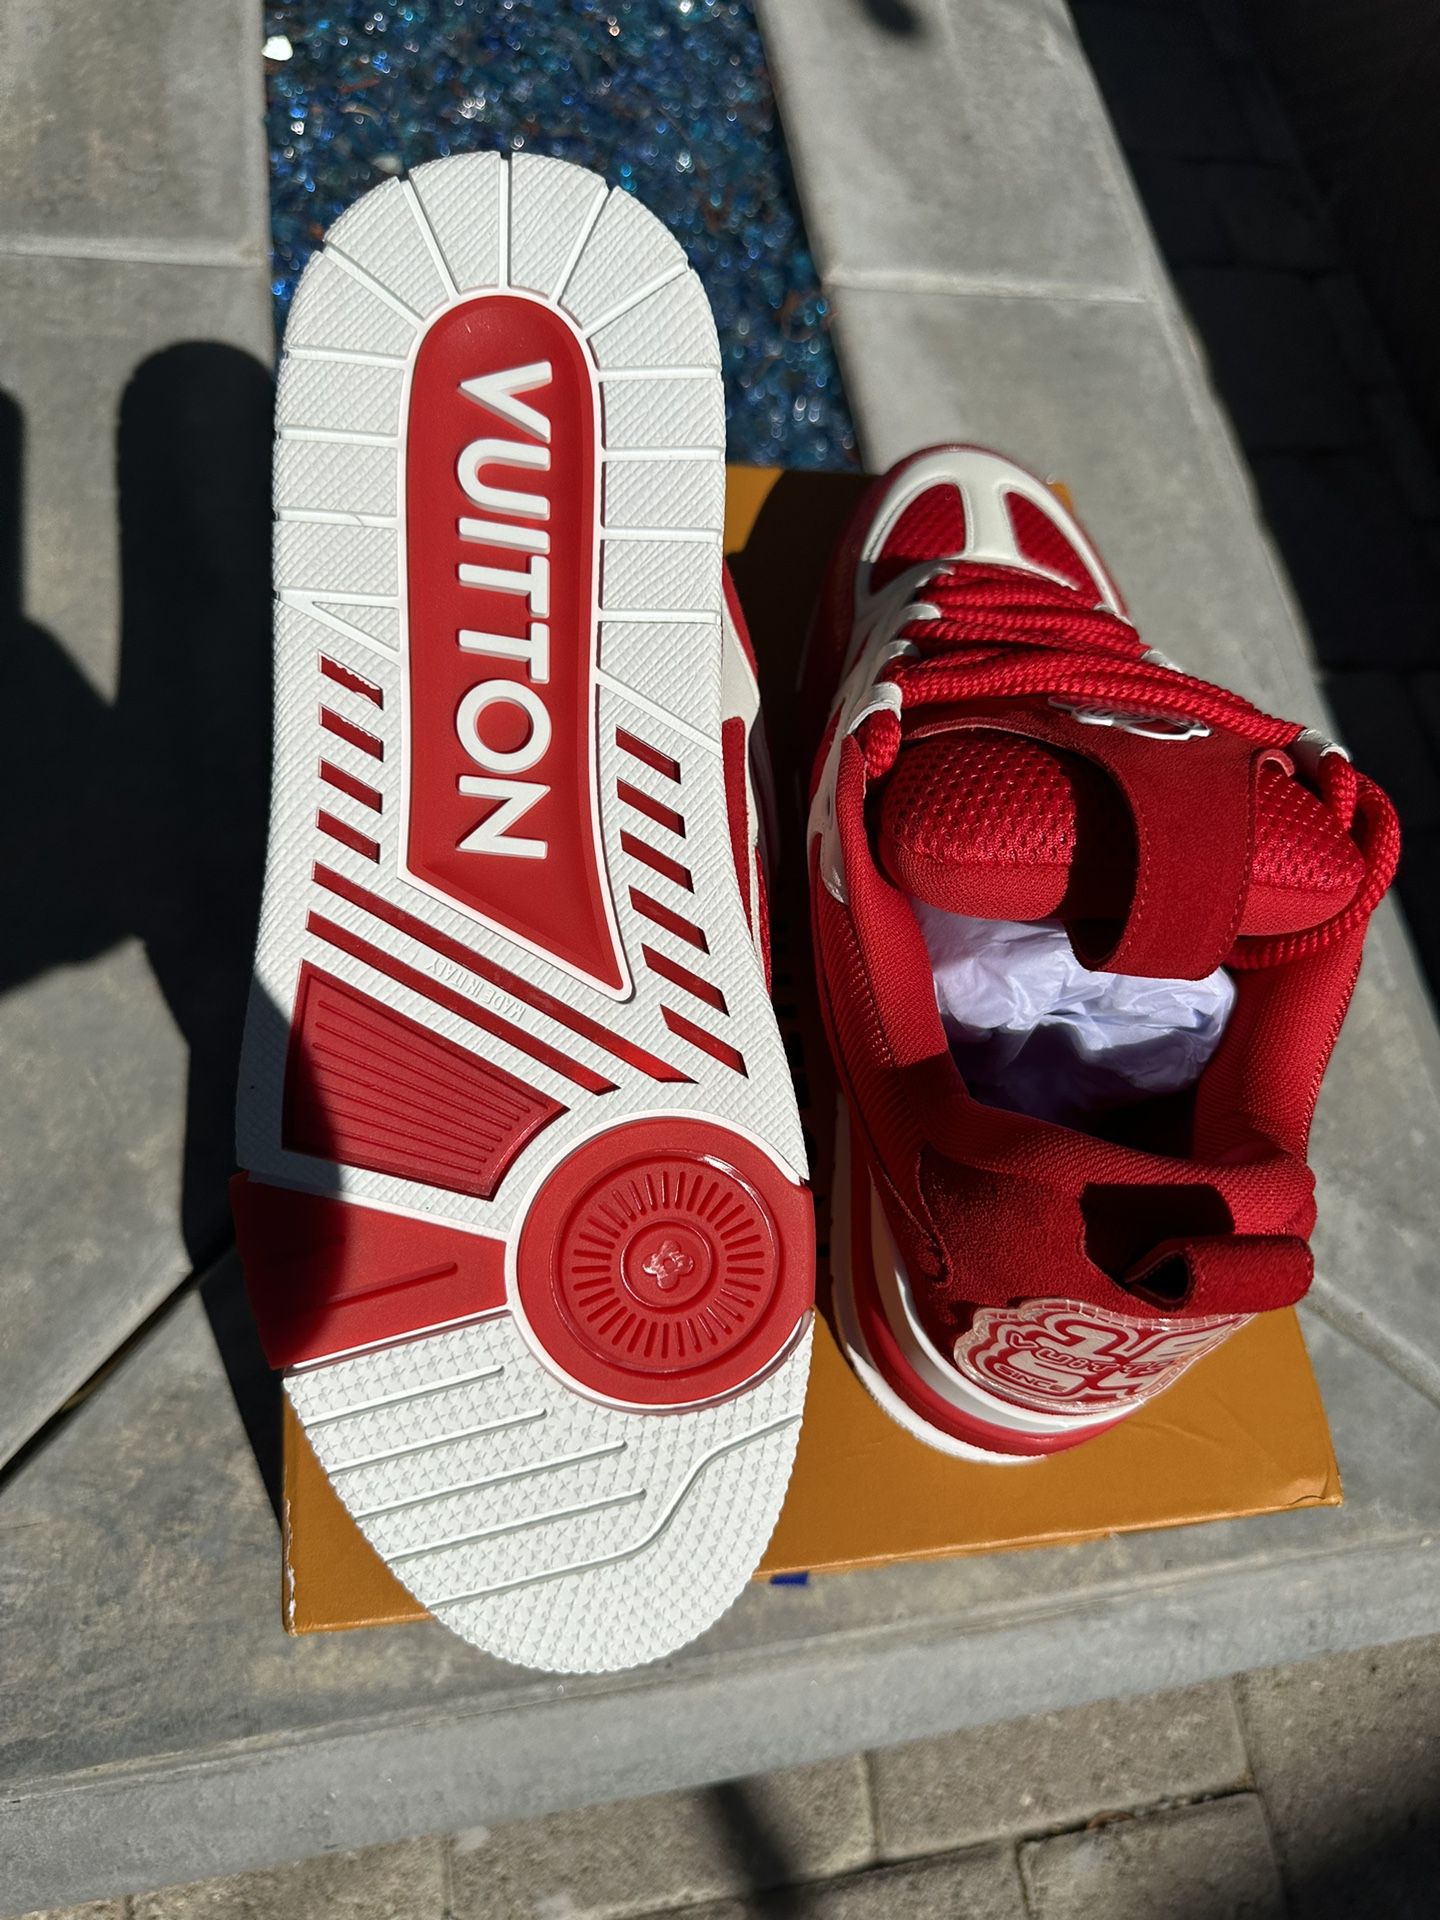 Louis Vuitton LV Skate Sneaker - Red/White for Sale in Dallas, TX - OfferUp